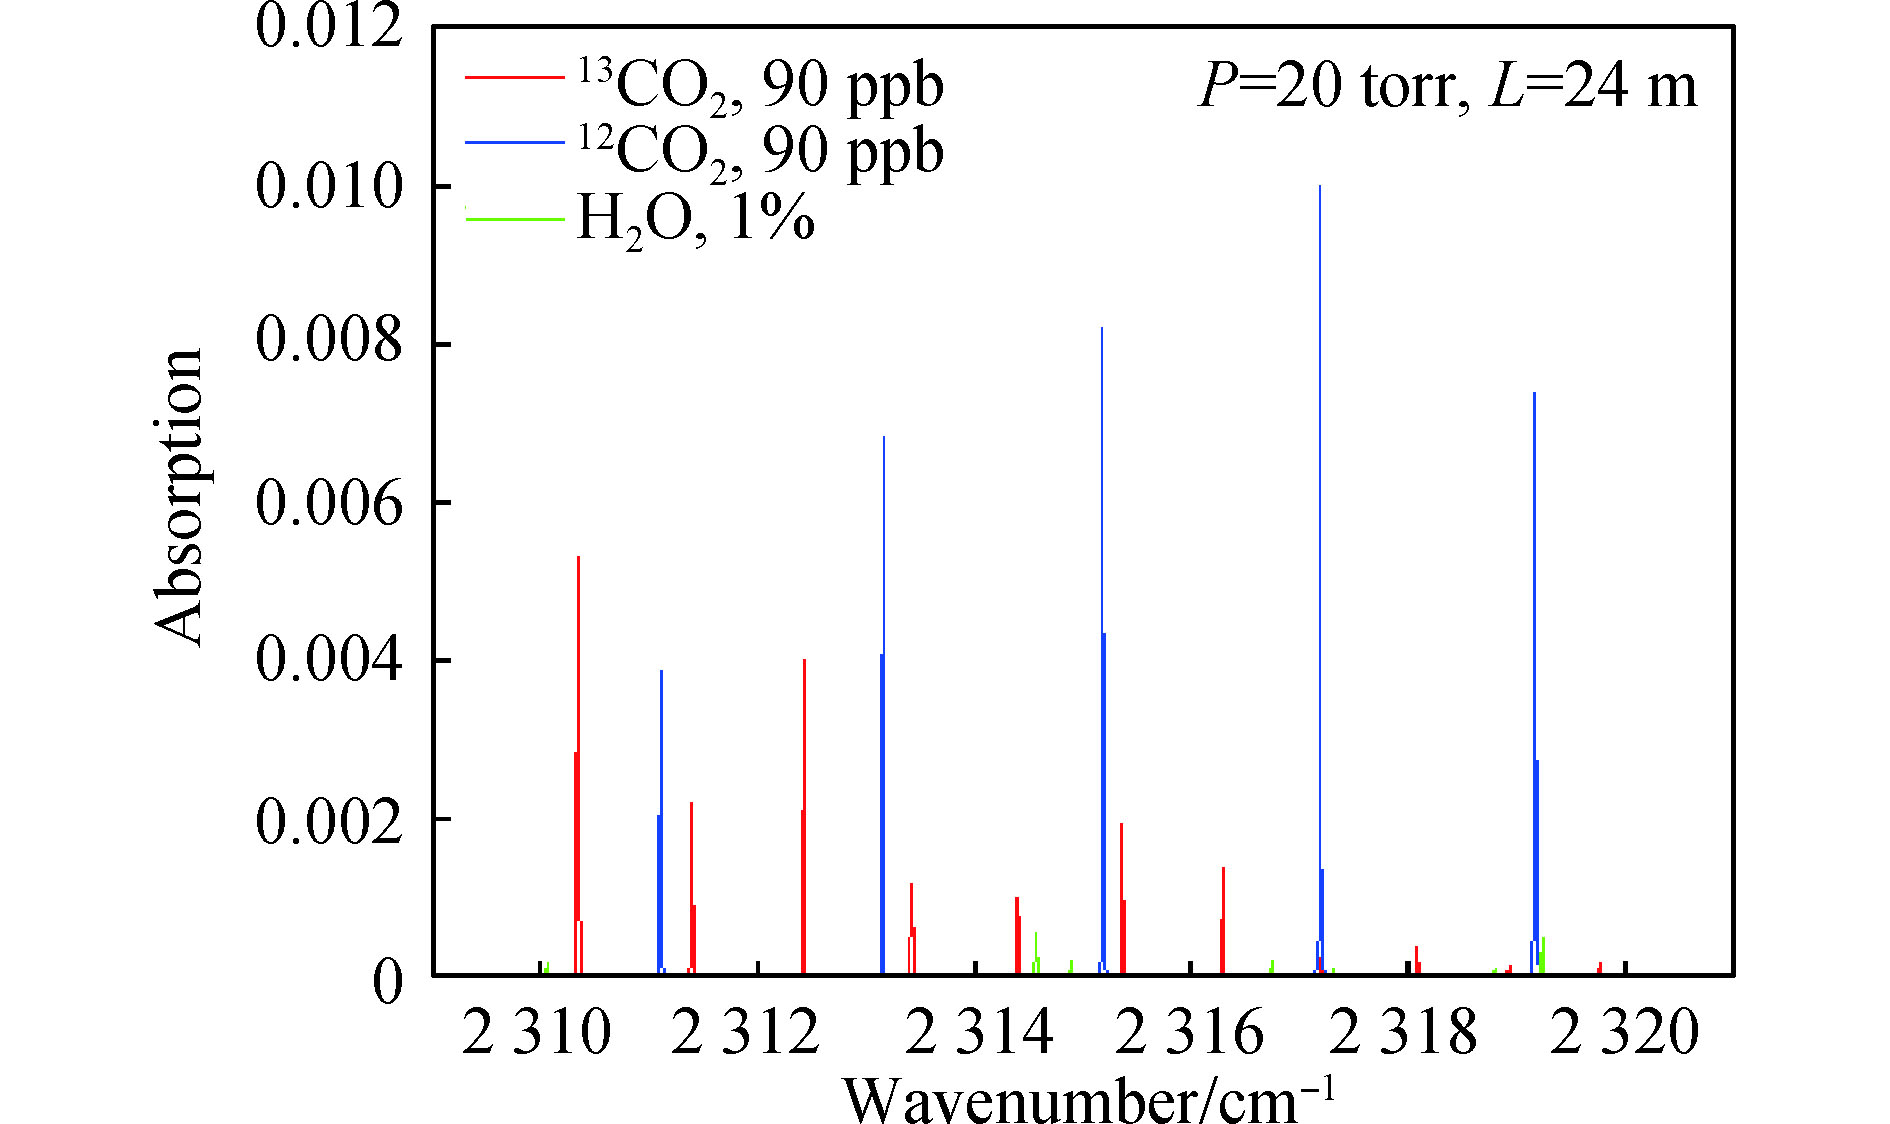 Absorption lines of CO2 isotope at 4.3 μm